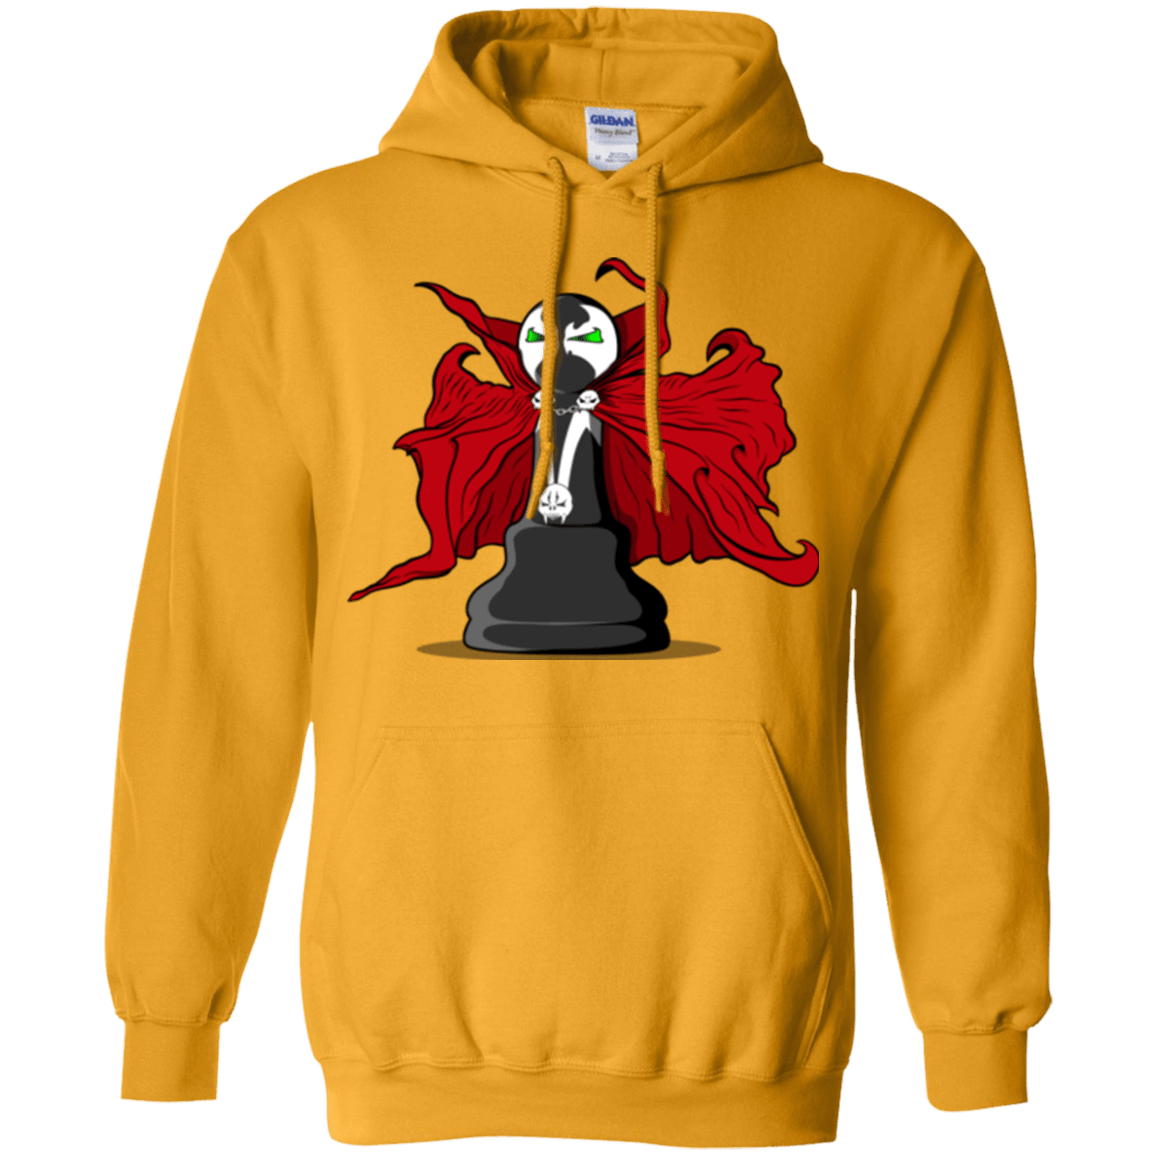 Sweatshirts Gold / Small Hells Pawn Pullover Hoodie